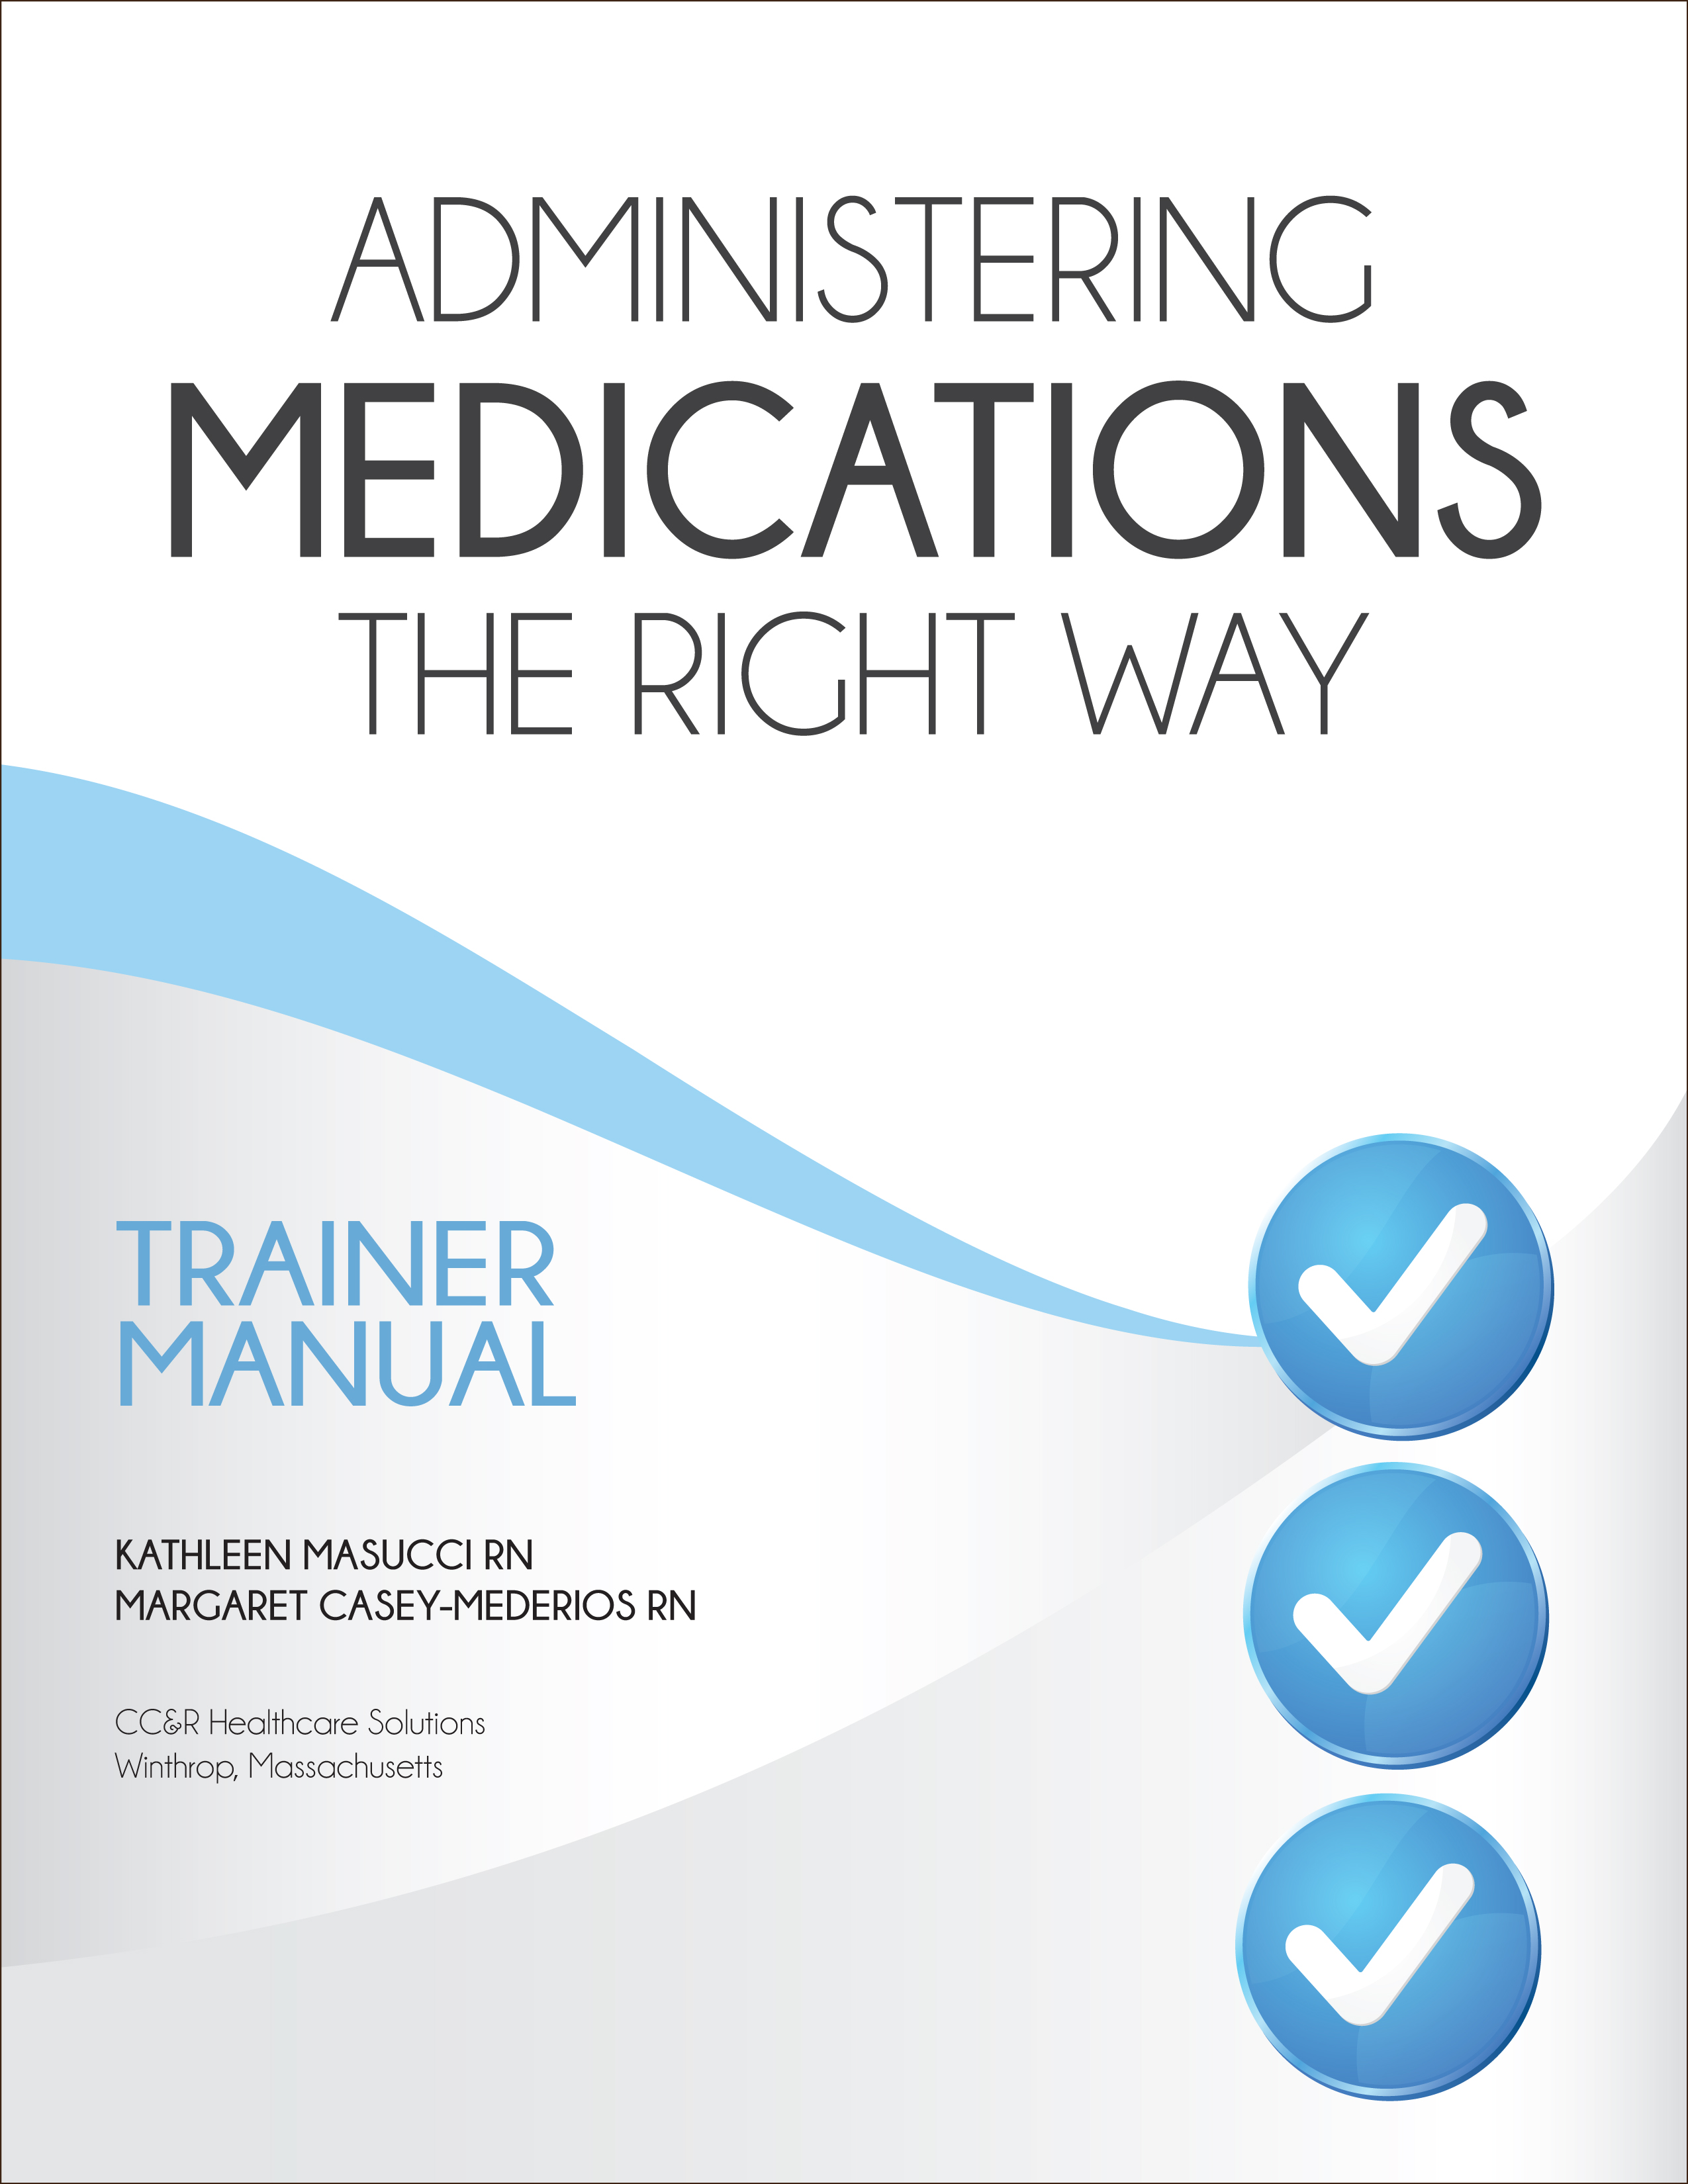 Administering Medications the Right Way Trainer Manual